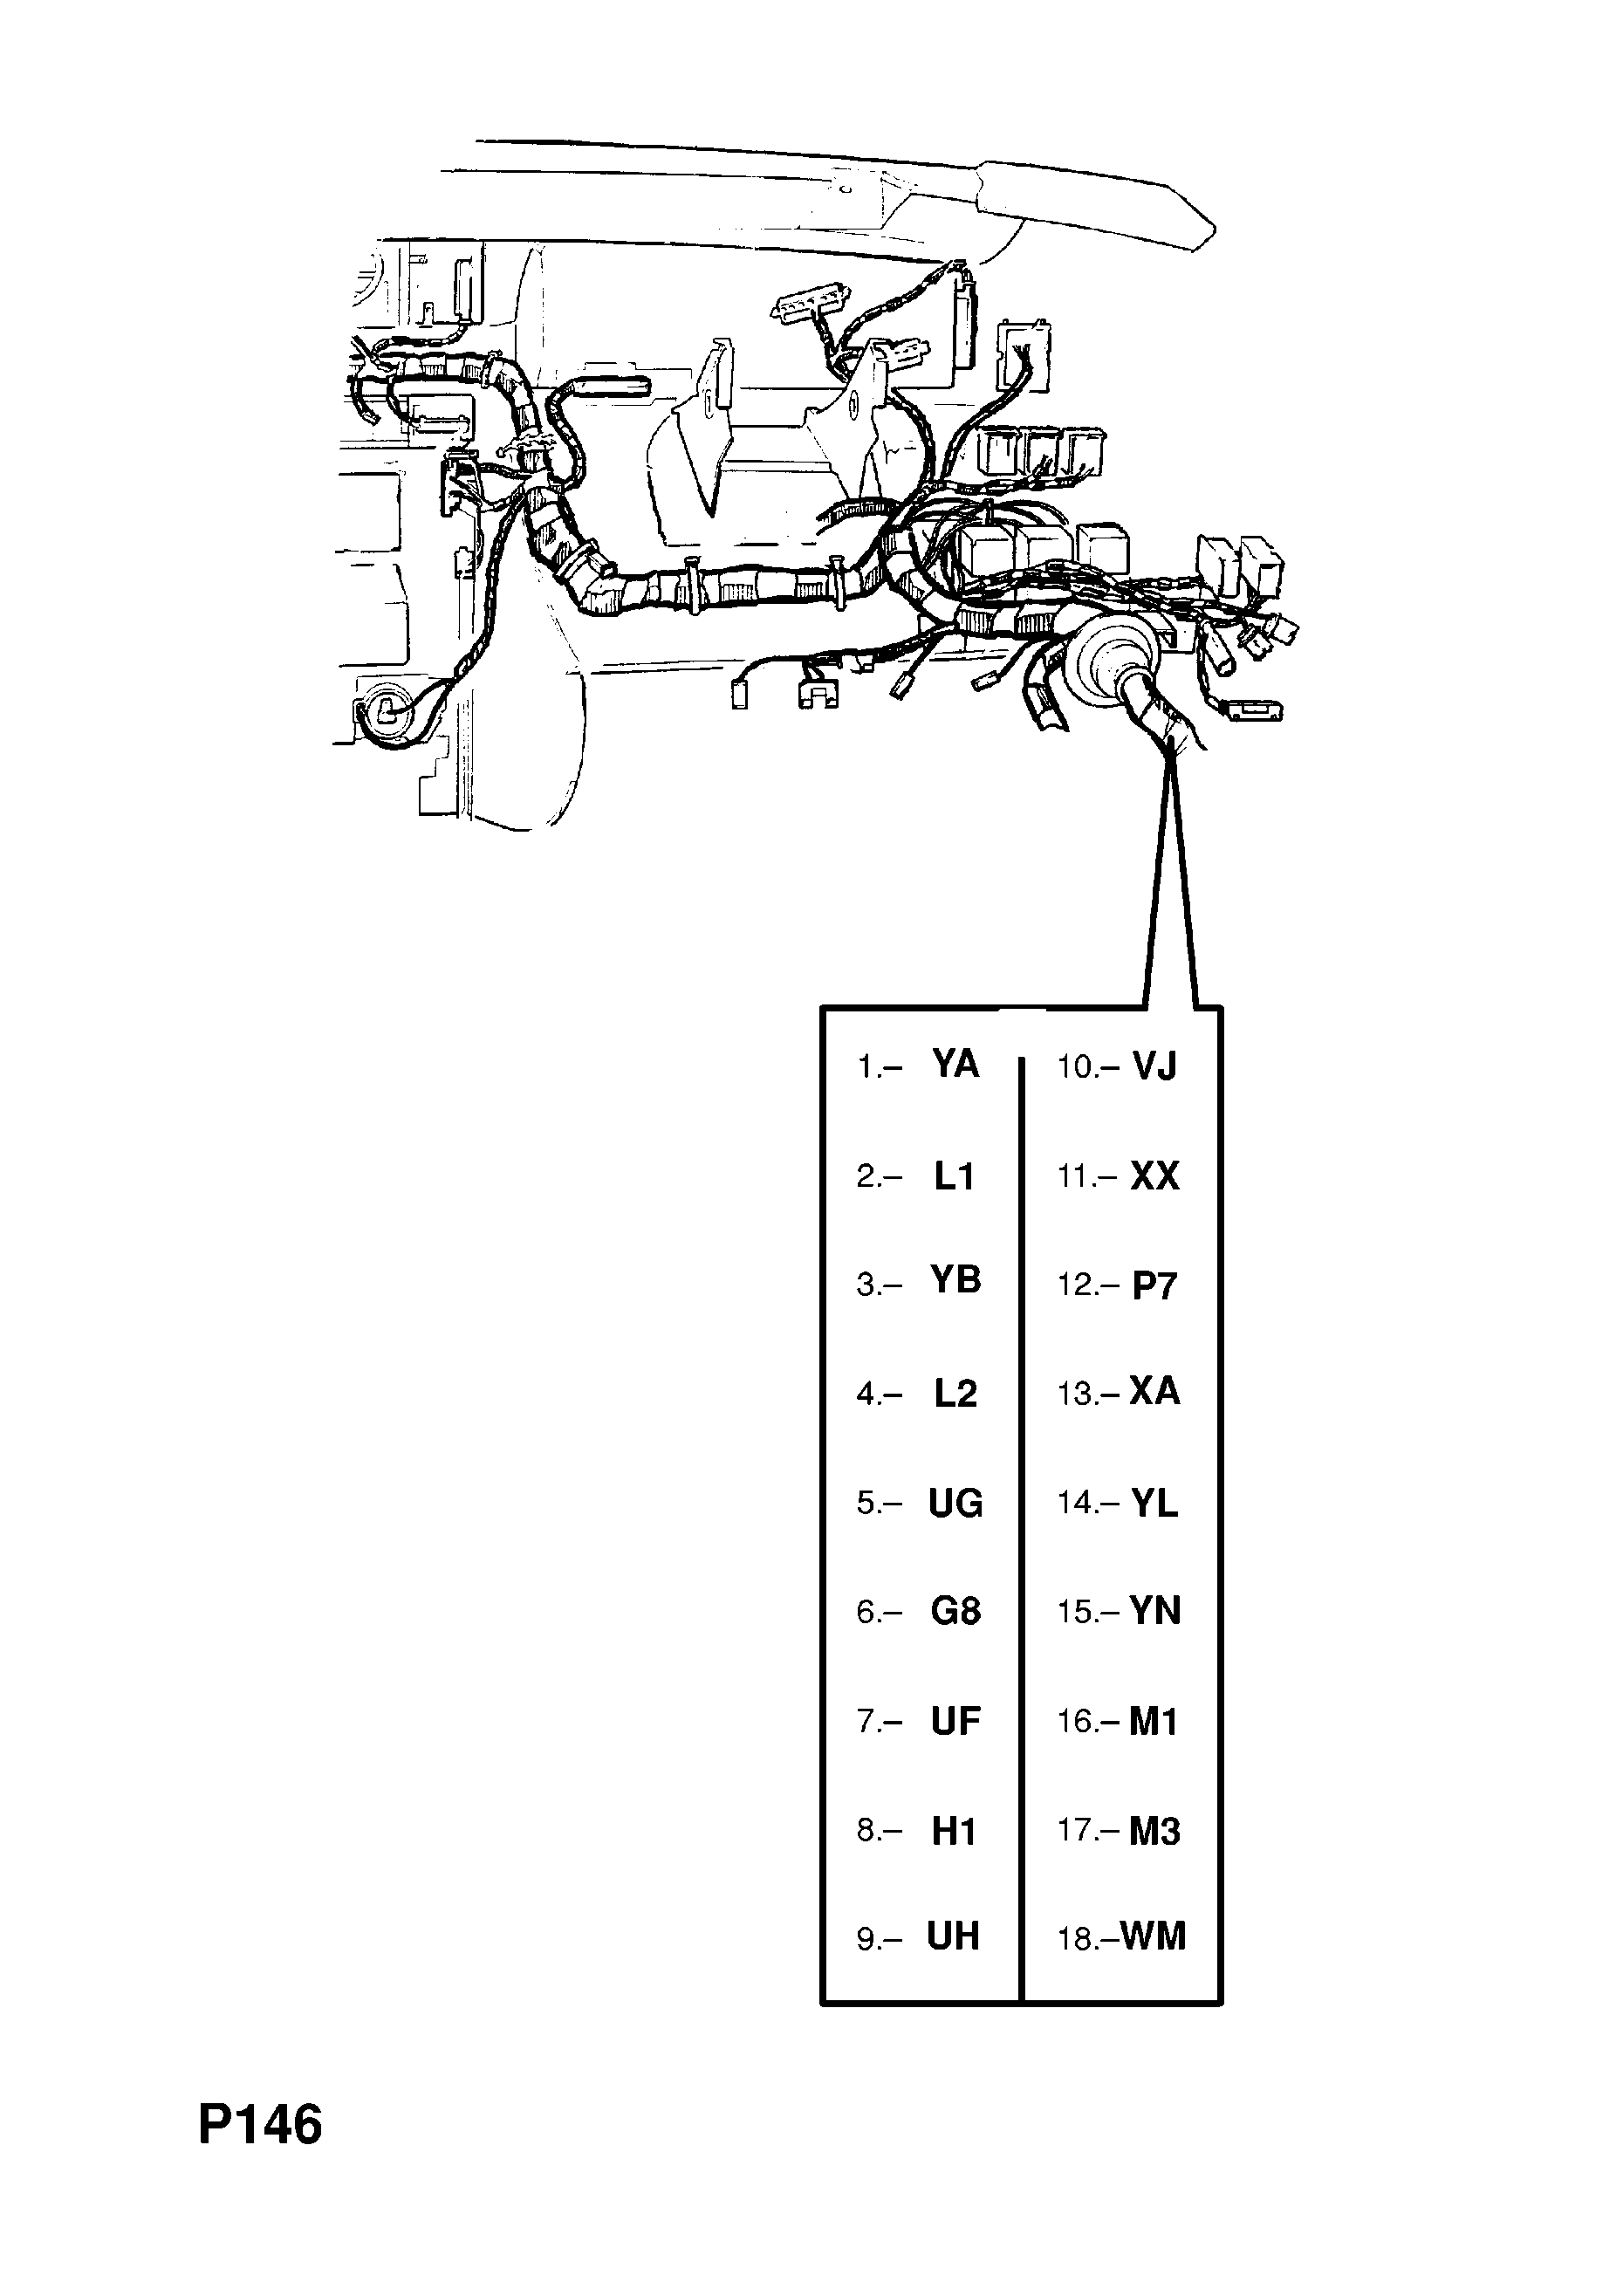 INSTRUMENT PANEL WIRING HARNESS (CONTD.) <small><i>[M1000001- FOR AIR CONDITIONING AND AUTOMATIC TRANSMISSION EXCEPT LCD INSTRUMENTS]</i></small>